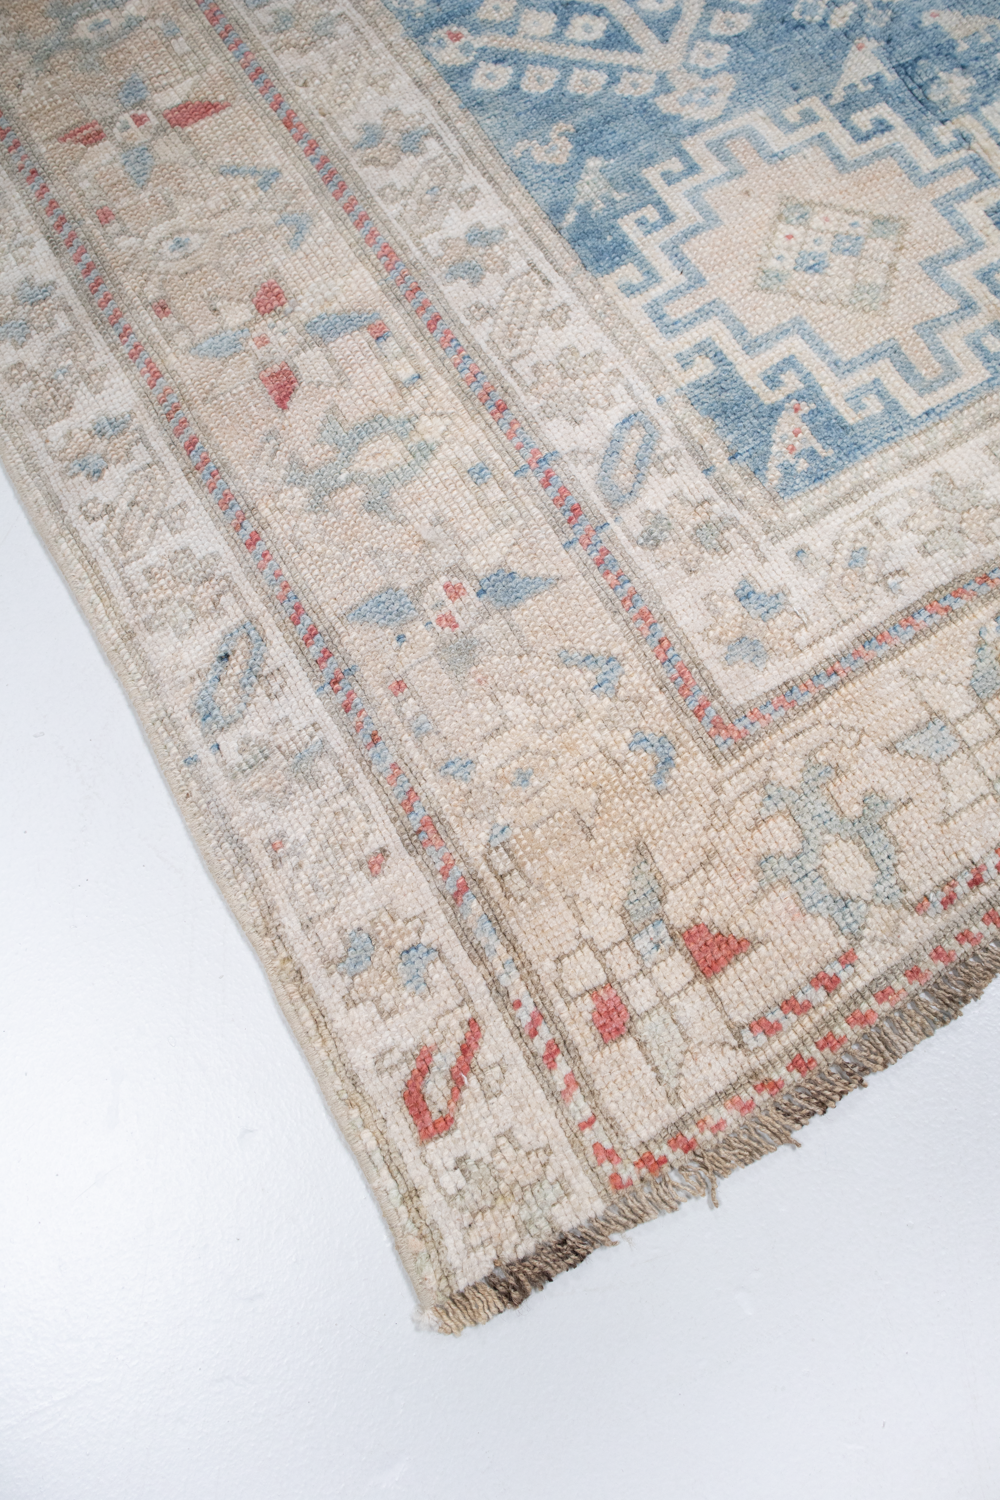 Antique Blue and Red Persian Gallery Runner Rug